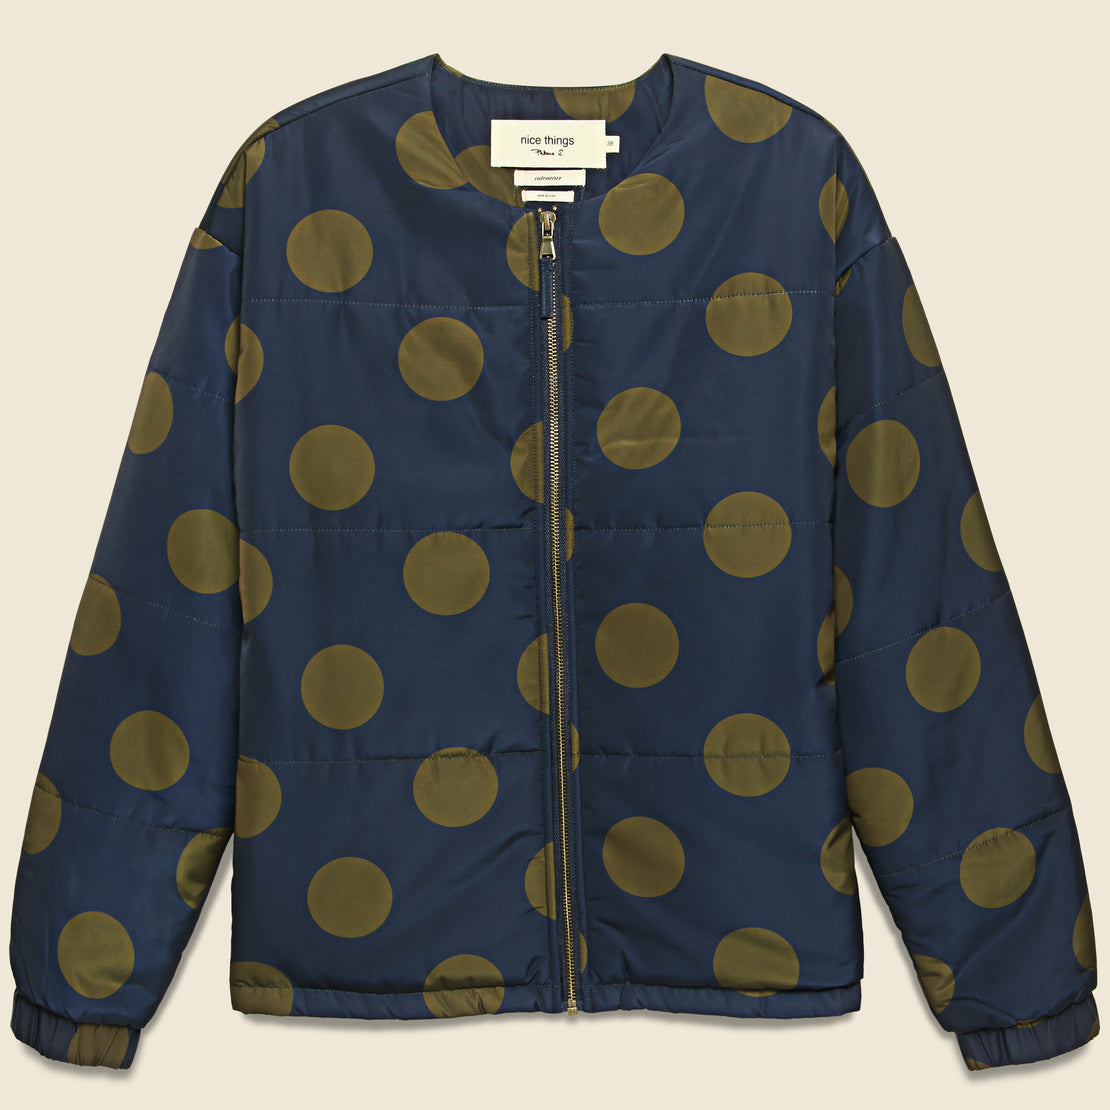 Nice Things Dotted Puffer Jacket - Navy